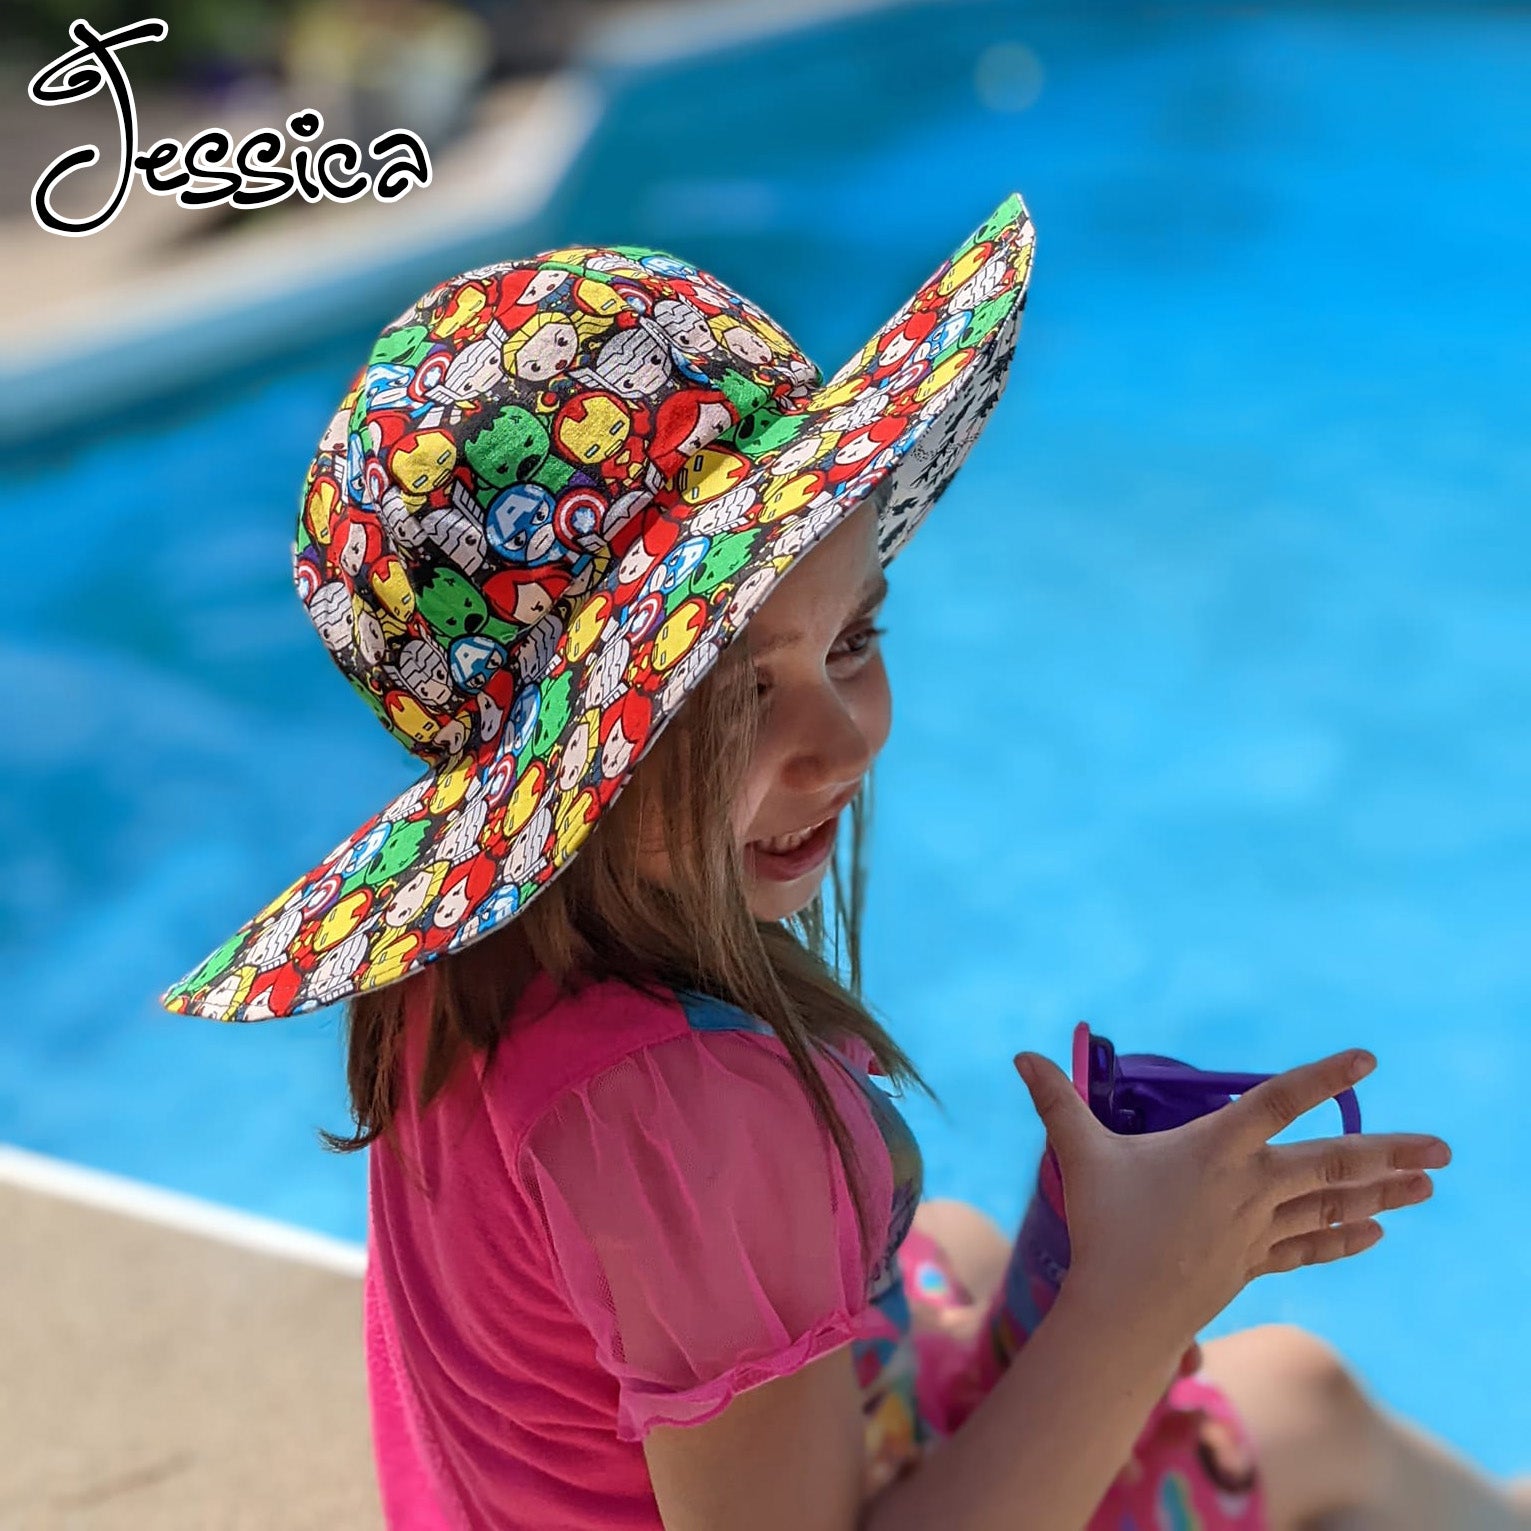 Reversible Wide Brim Sun Hat, sewing pattern and instructions, digital  format